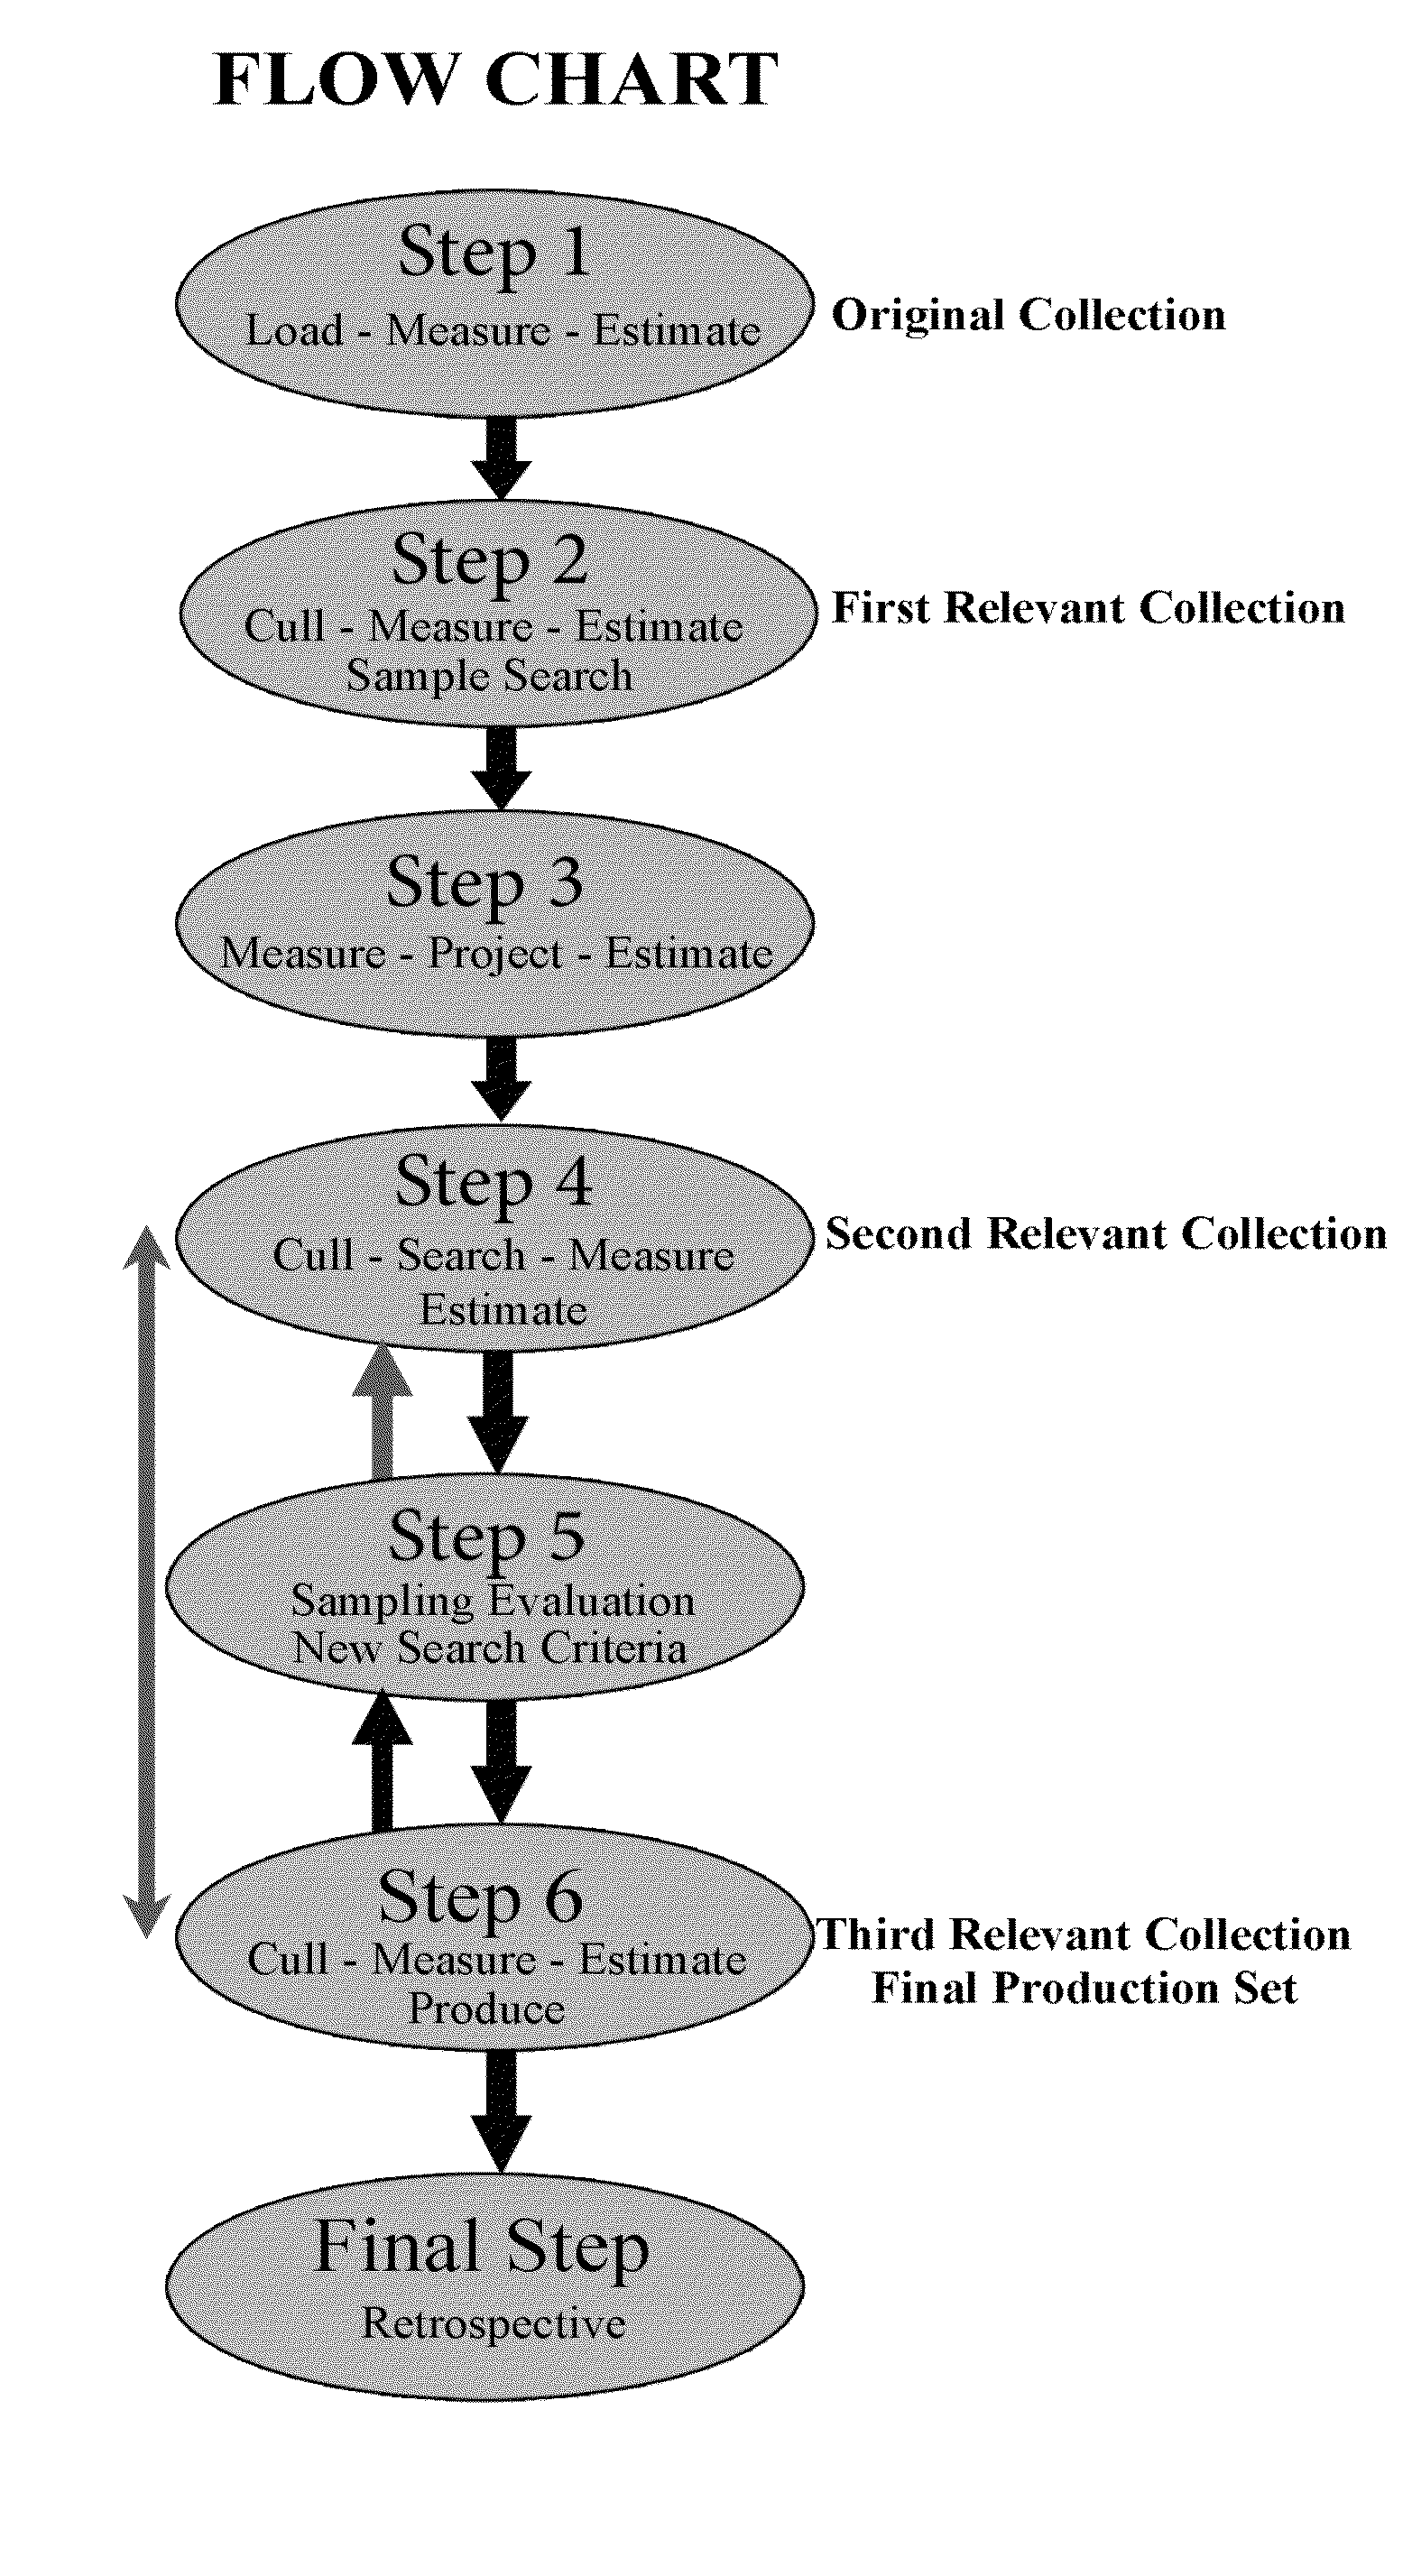 System and method for establishing, managing, and controlling the time, cost, and quality of information retrieval and production in electronic discovery